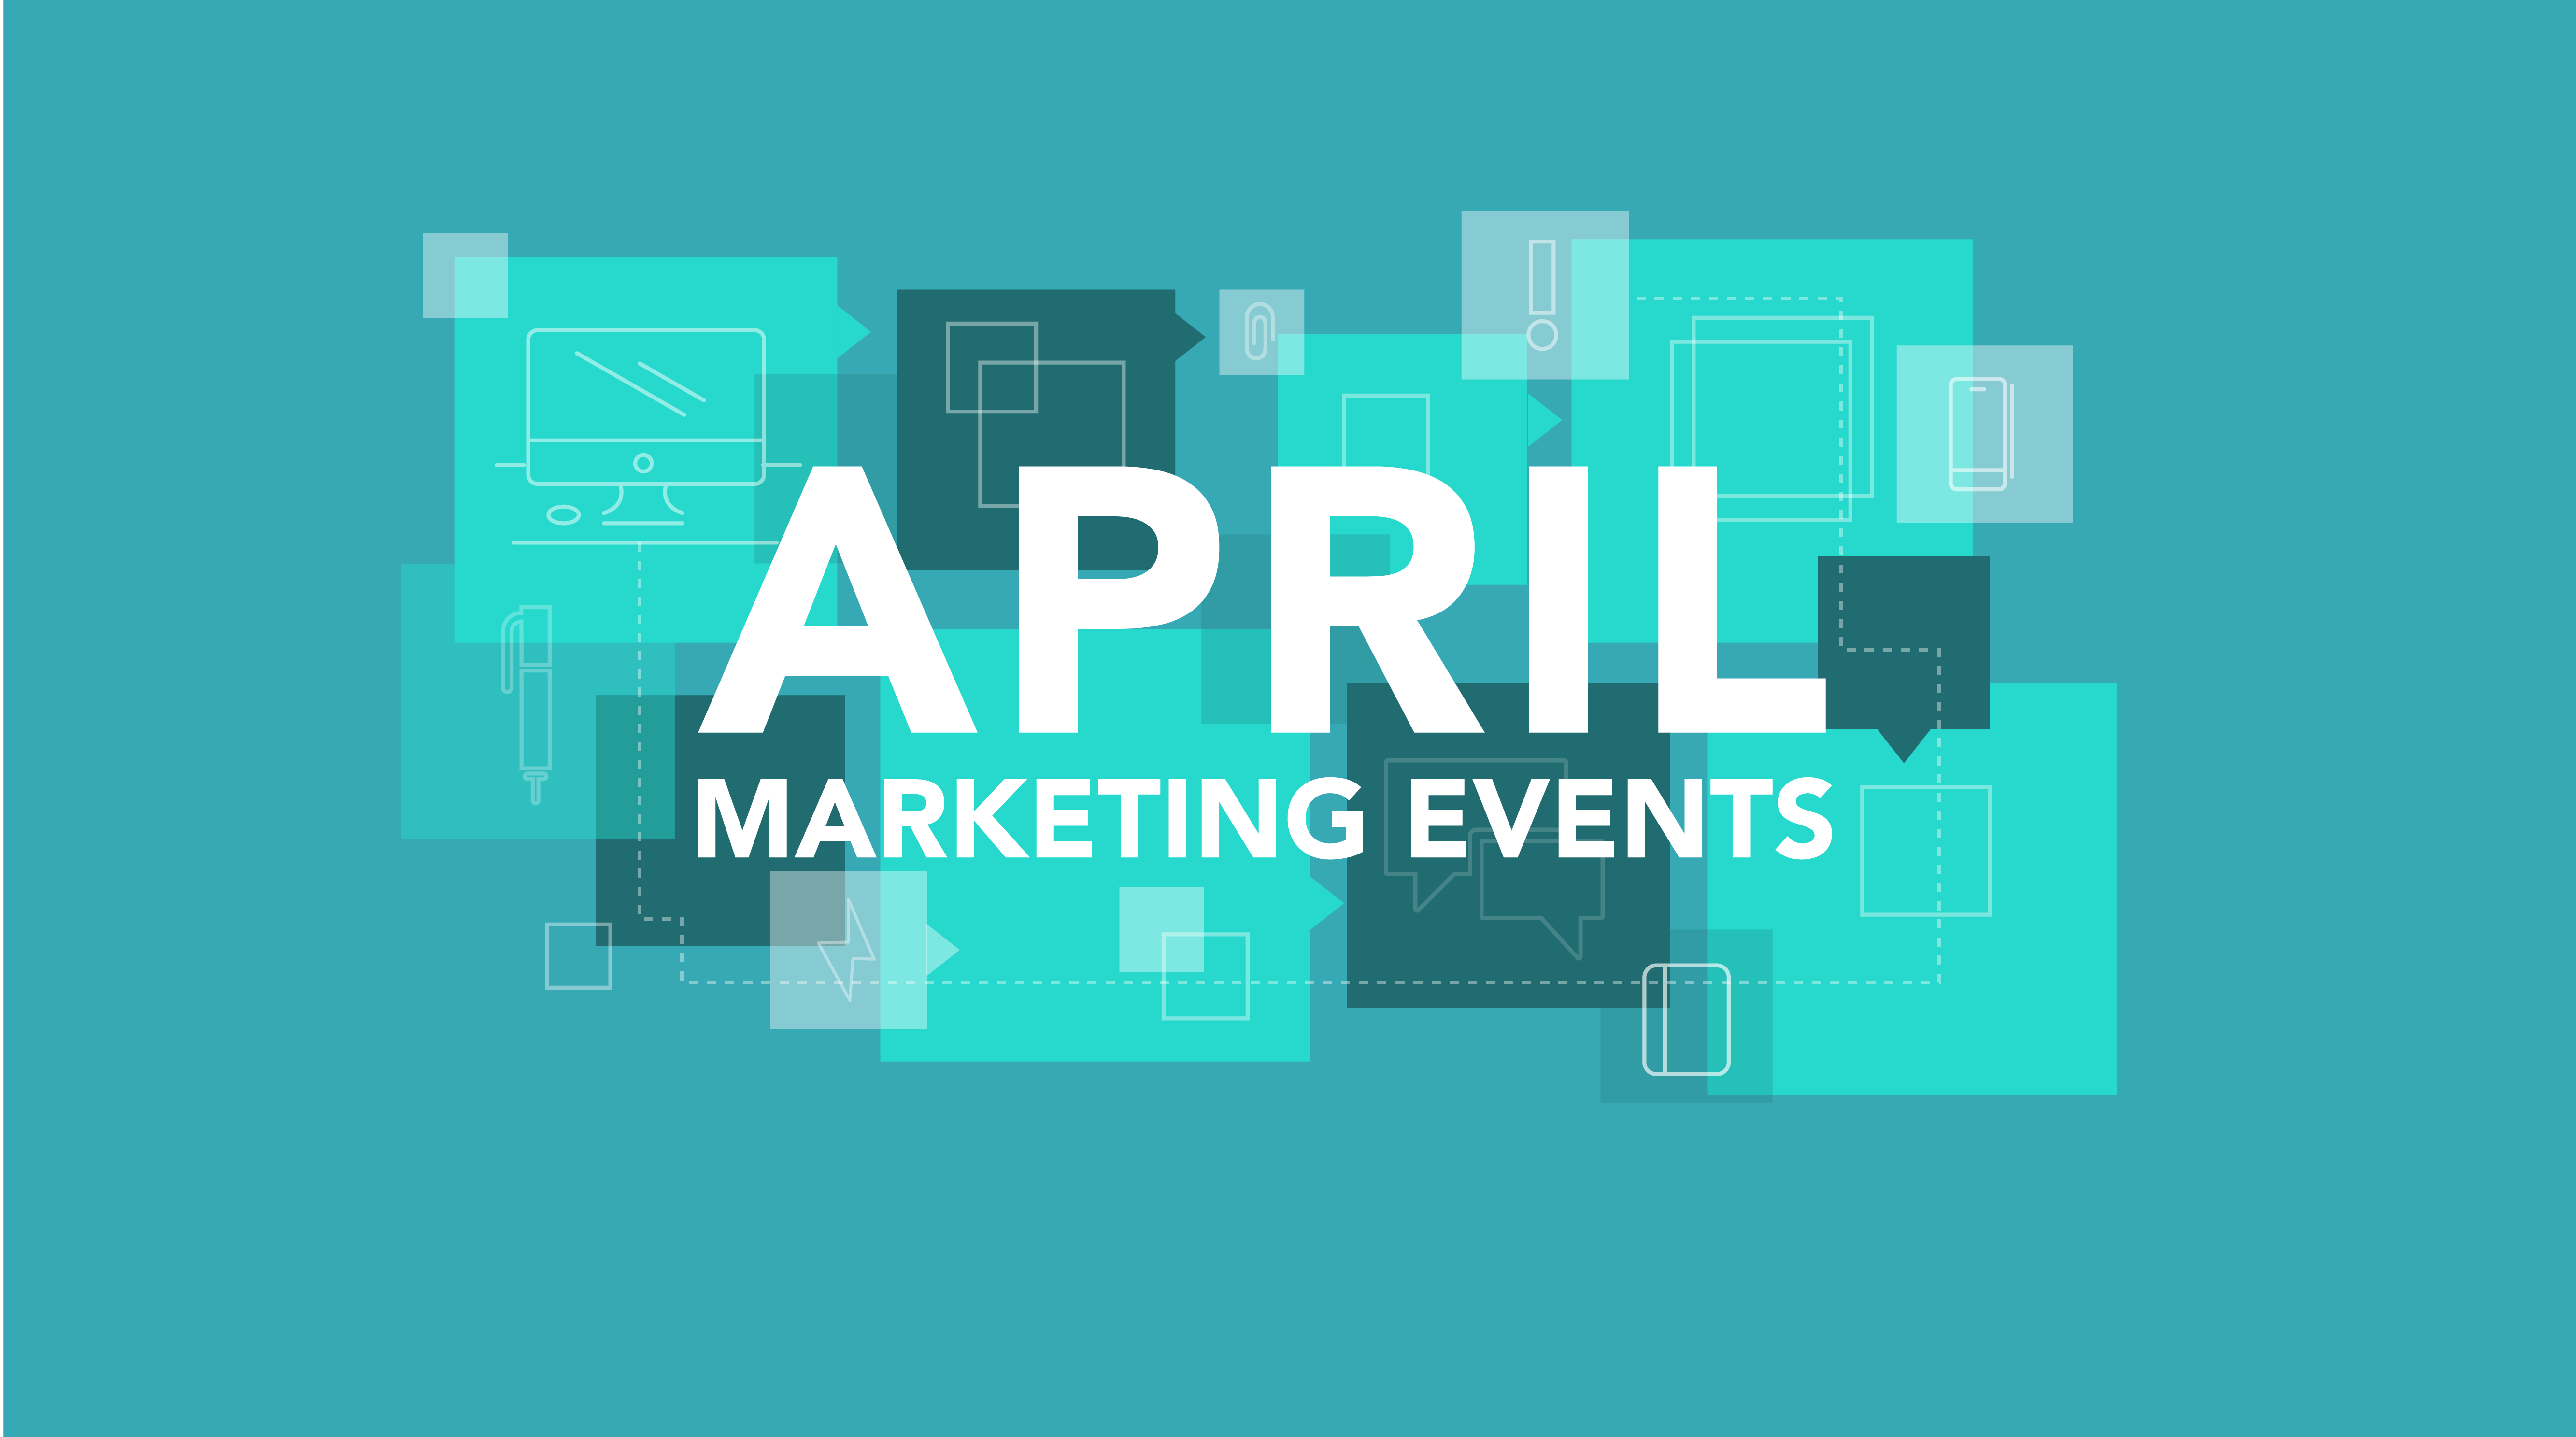 April 2015 Marketing and Design Events in St. Louis